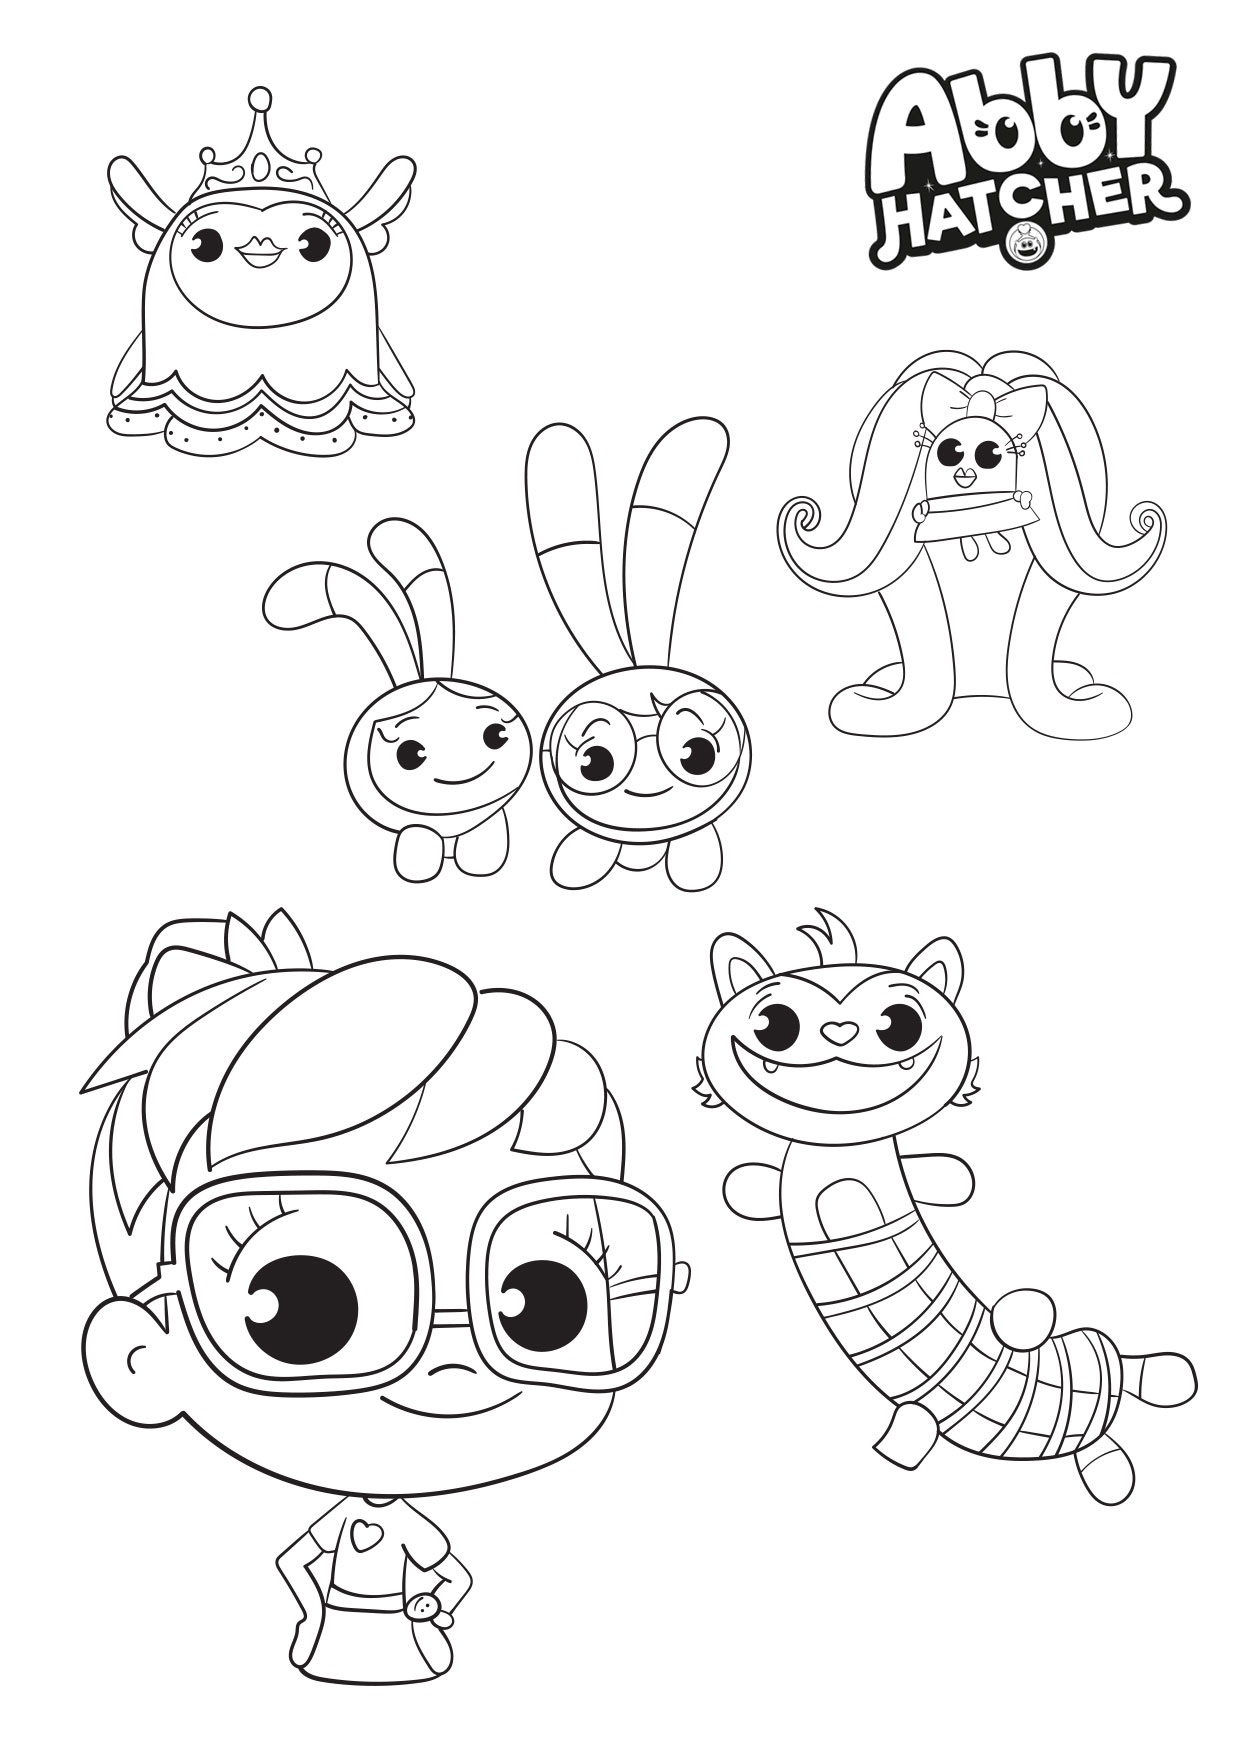 Abby Hatcher and Friends Coloring Pages